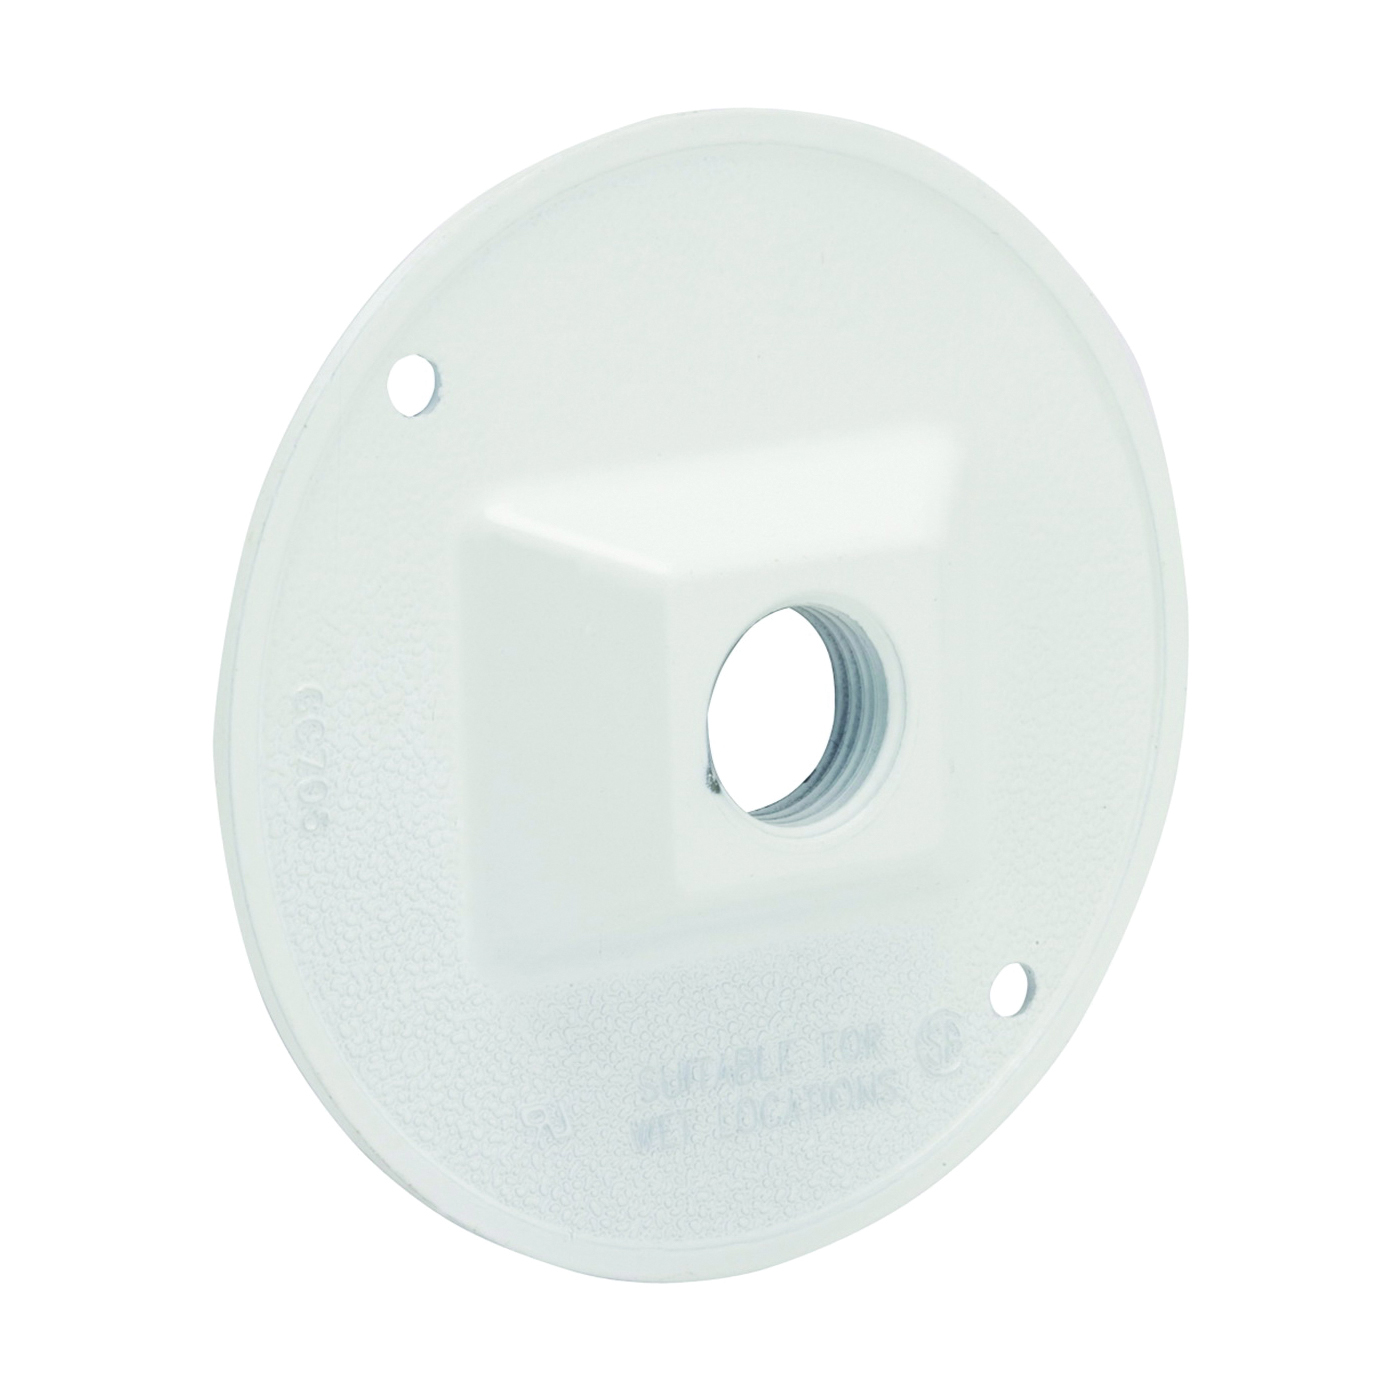 5193-6 Cluster Cover, 4-1/8 in Dia, 4-1/8 in W, Round, Metal, White, Powder-Coated